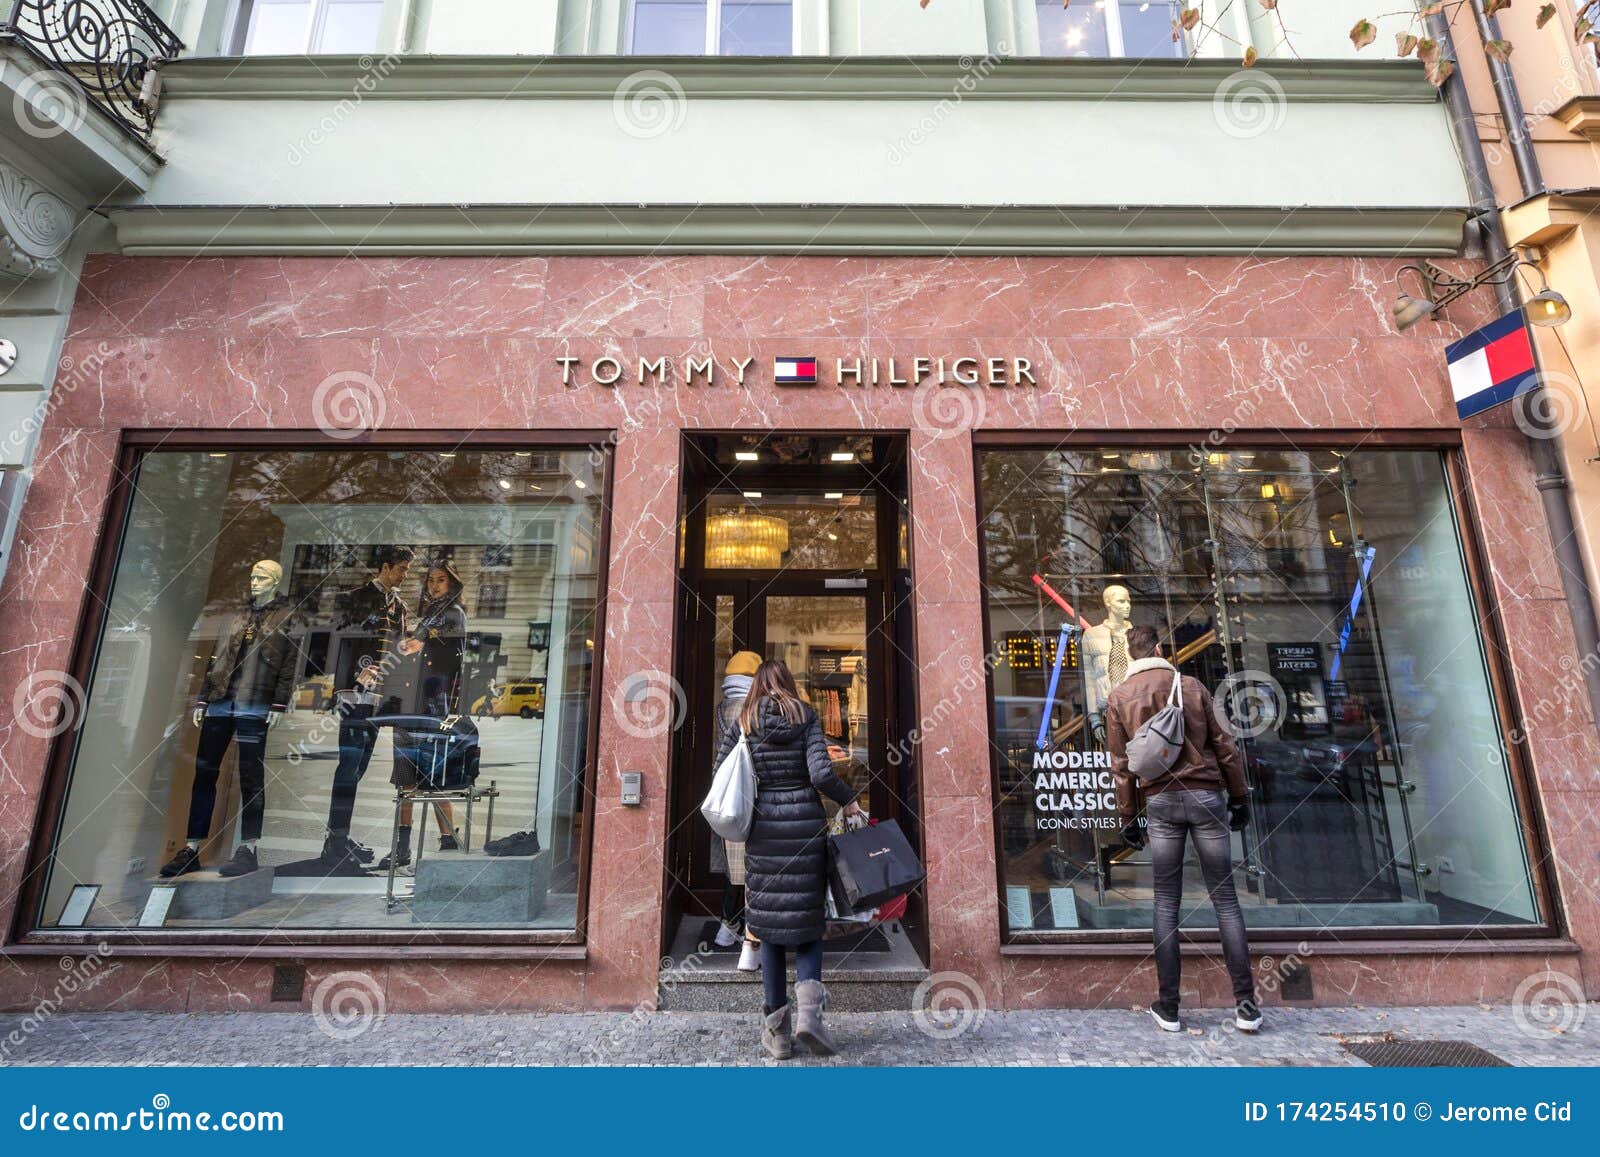 Hilfiger Logo on Their Local Boutique in Editorial Image - Image collection, market: